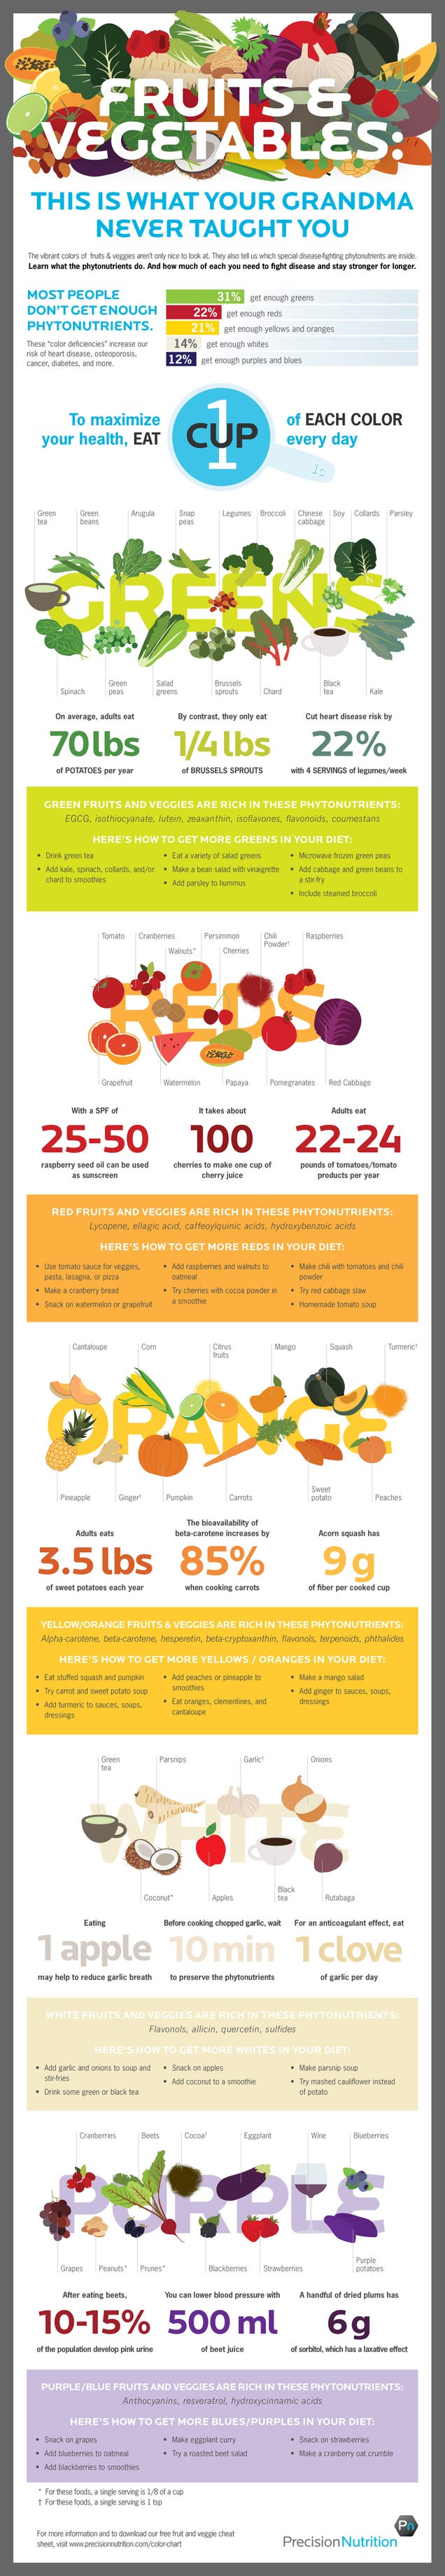 This Infographic Shows the Phytonutrients You Need to Stay Healthy